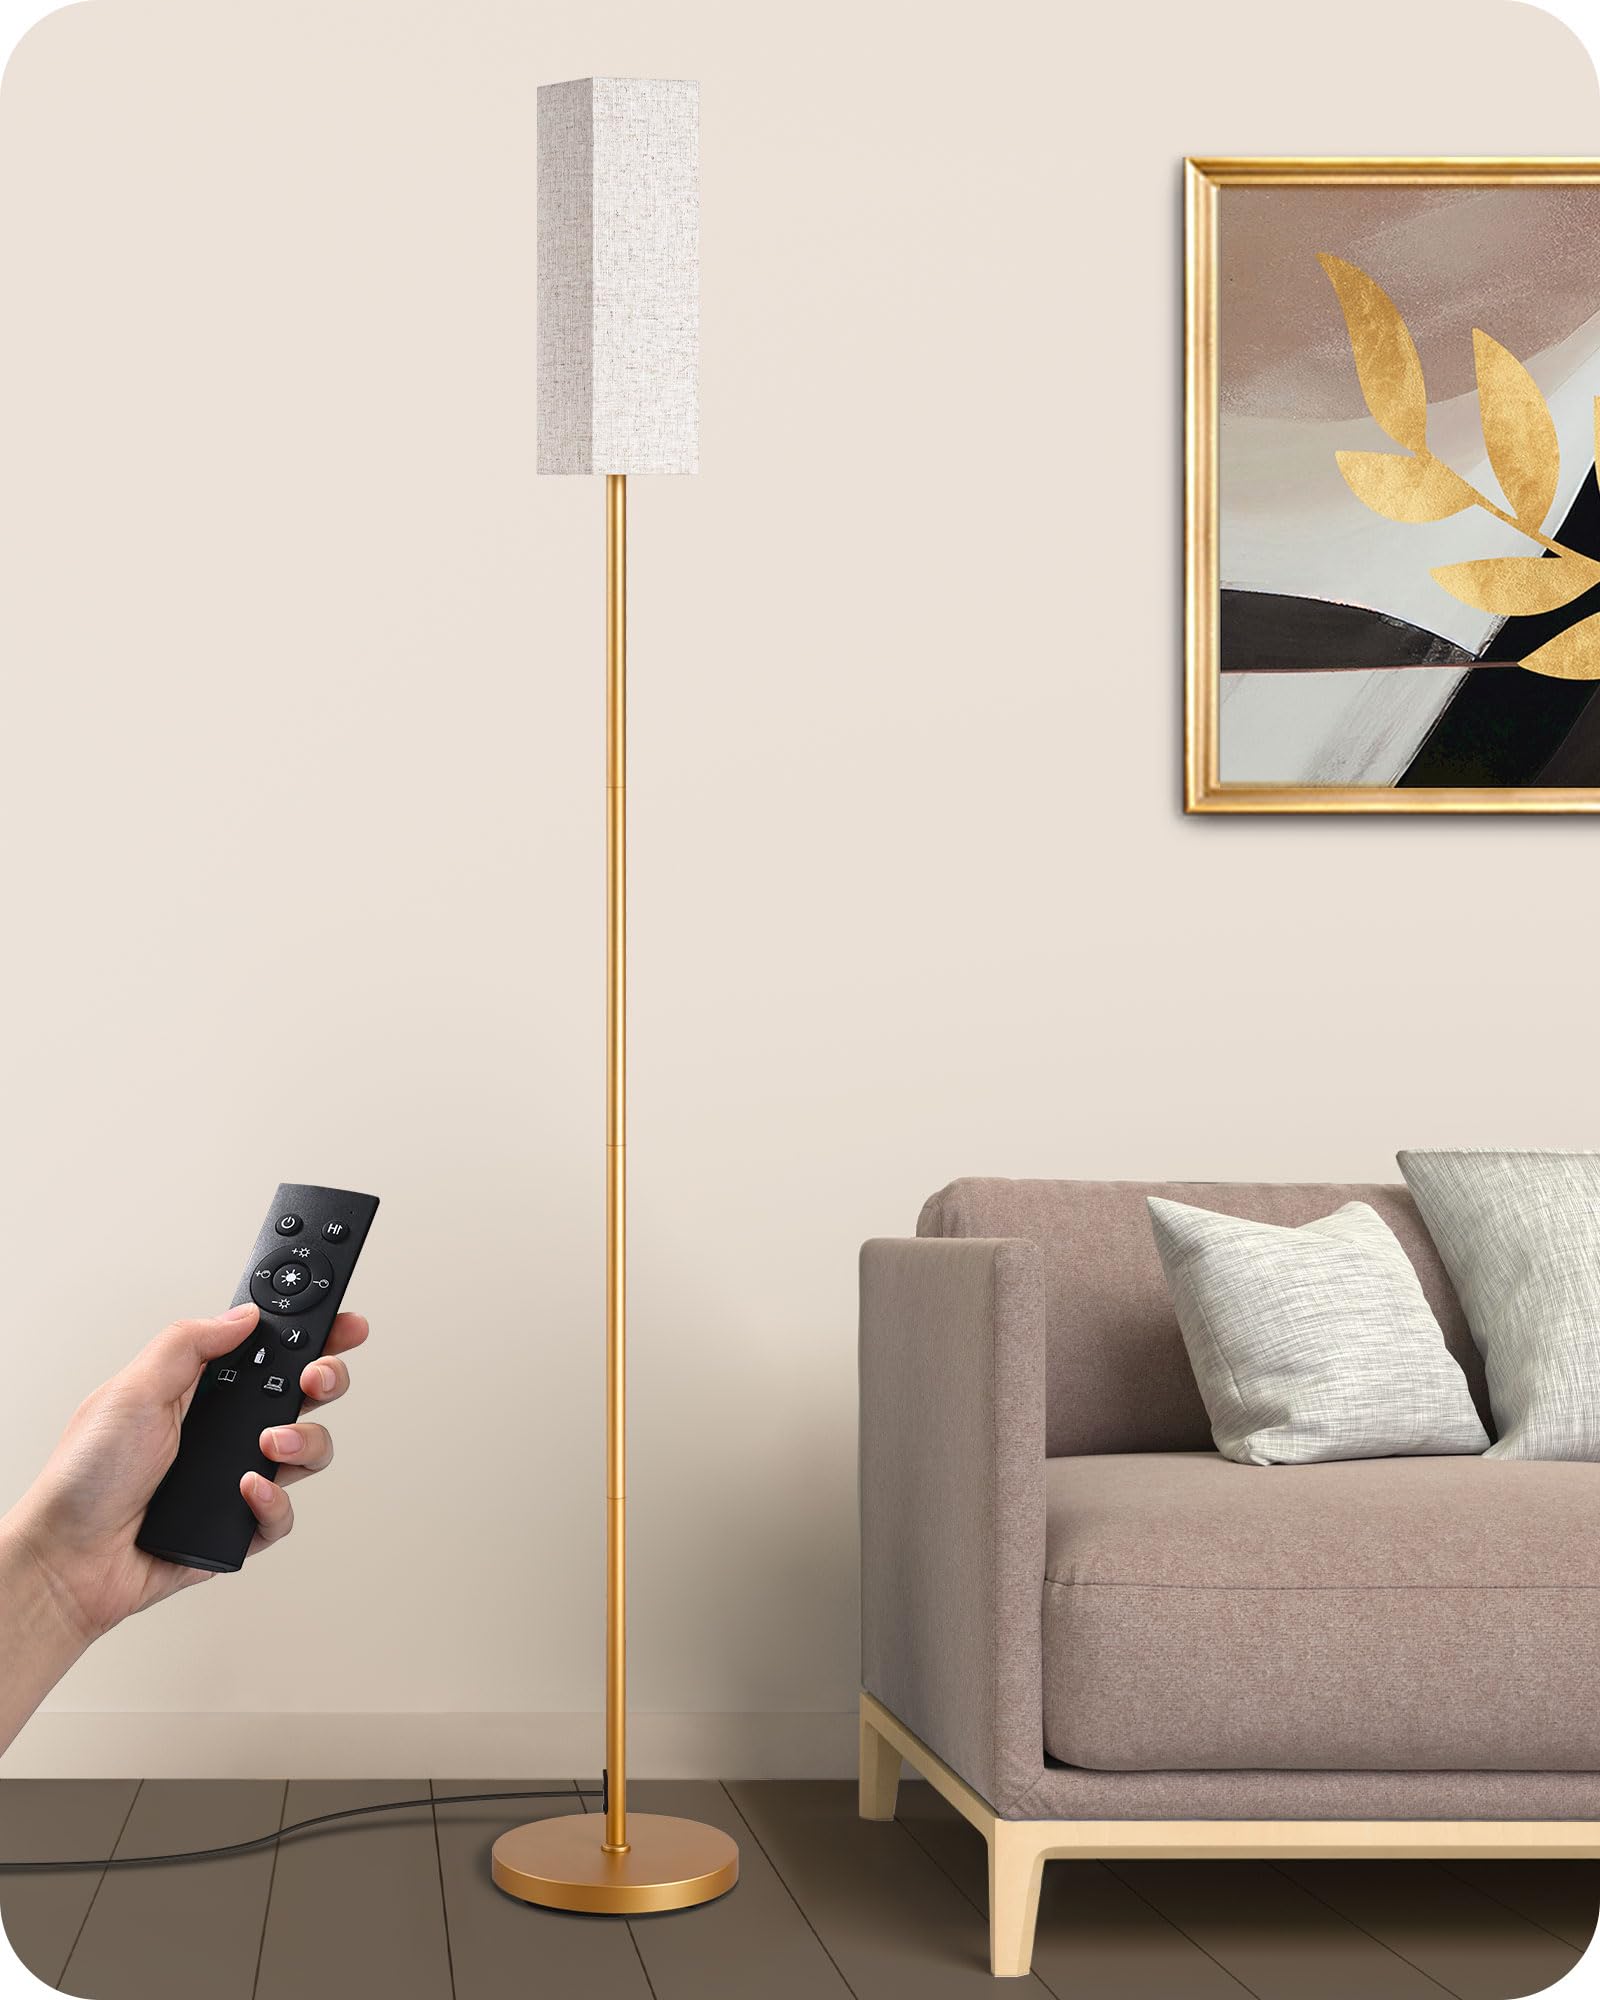 EDISHINE Modern Corner Floor Lamp with Remote, Stepless Dimmable Minimalist Reading Lamp, 65" Tall Pole Lamp for Living Room, Bedroom, Office, 9W LED Bulb Included (Gold)